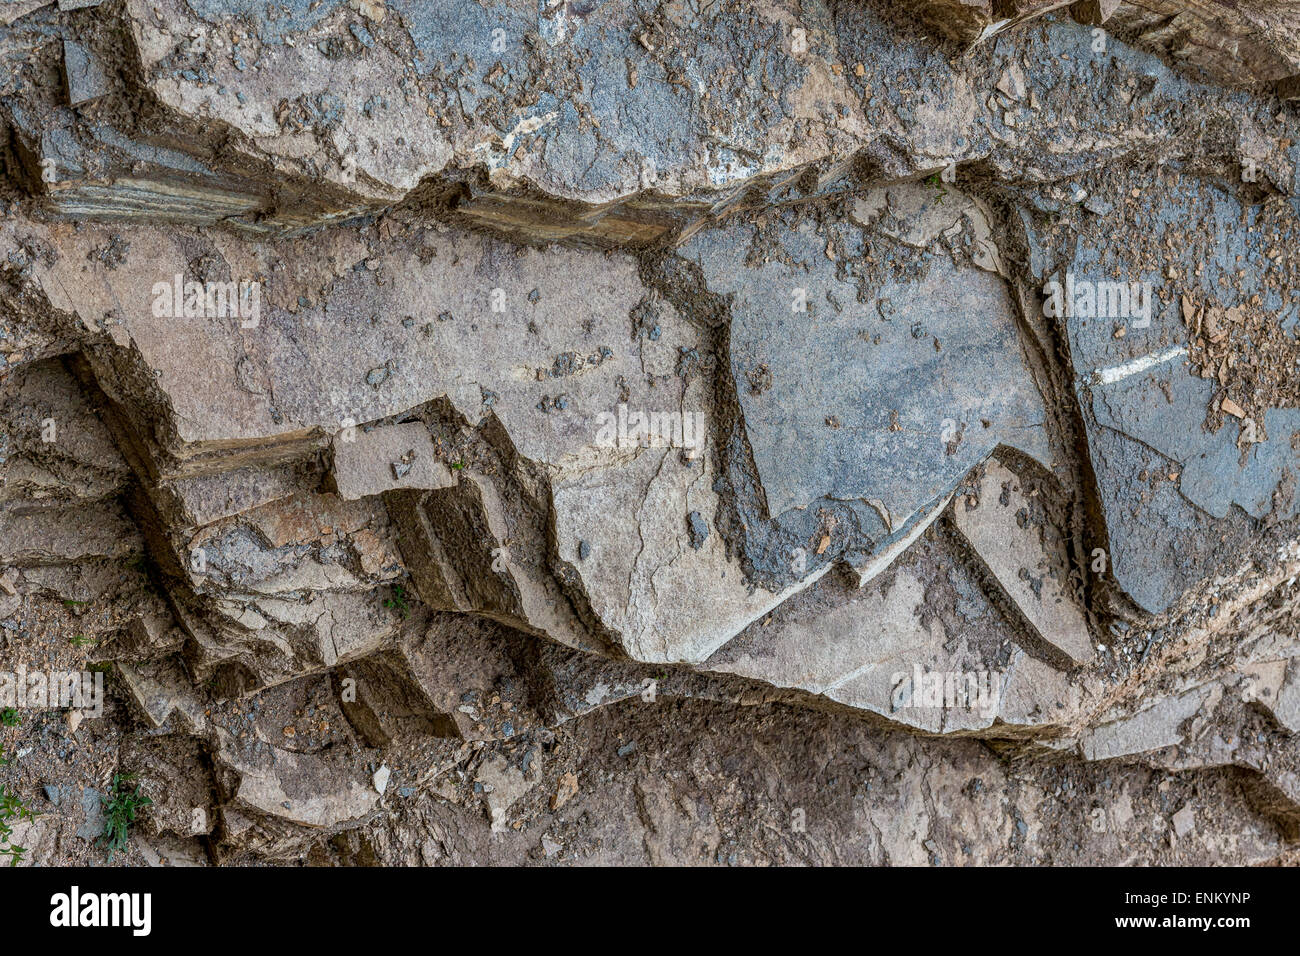 Rock formation. Geology. Layers of gray stones and dirt discovering interesting shapes. Stock Photo